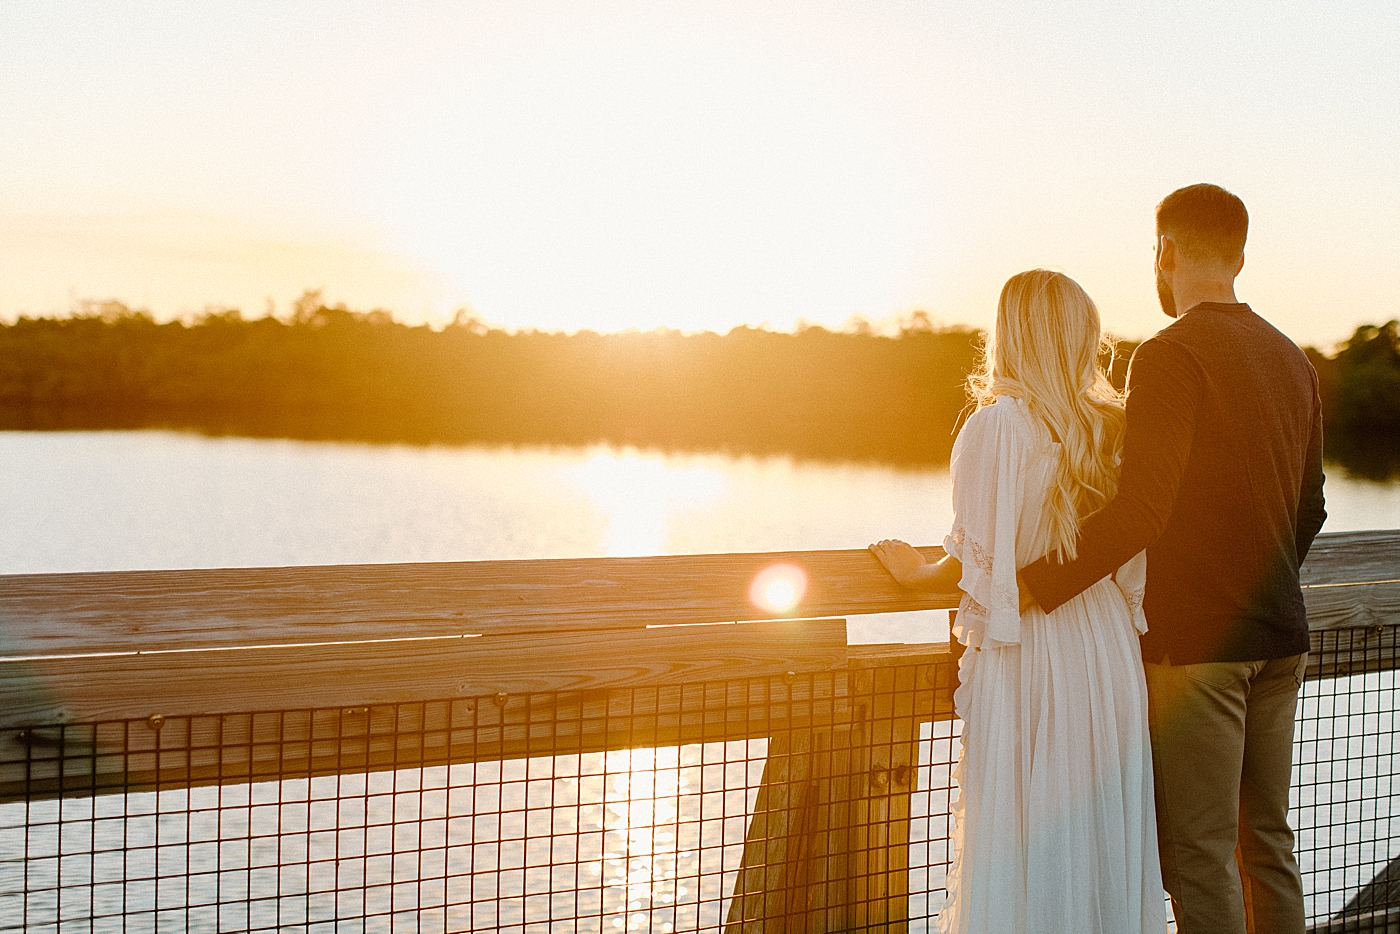 Couple with arms around each other as they watch the sunset on calm river Jupiter Engagement Photography captured by South Florida Engagement Photographer Erika Tuesta Photography